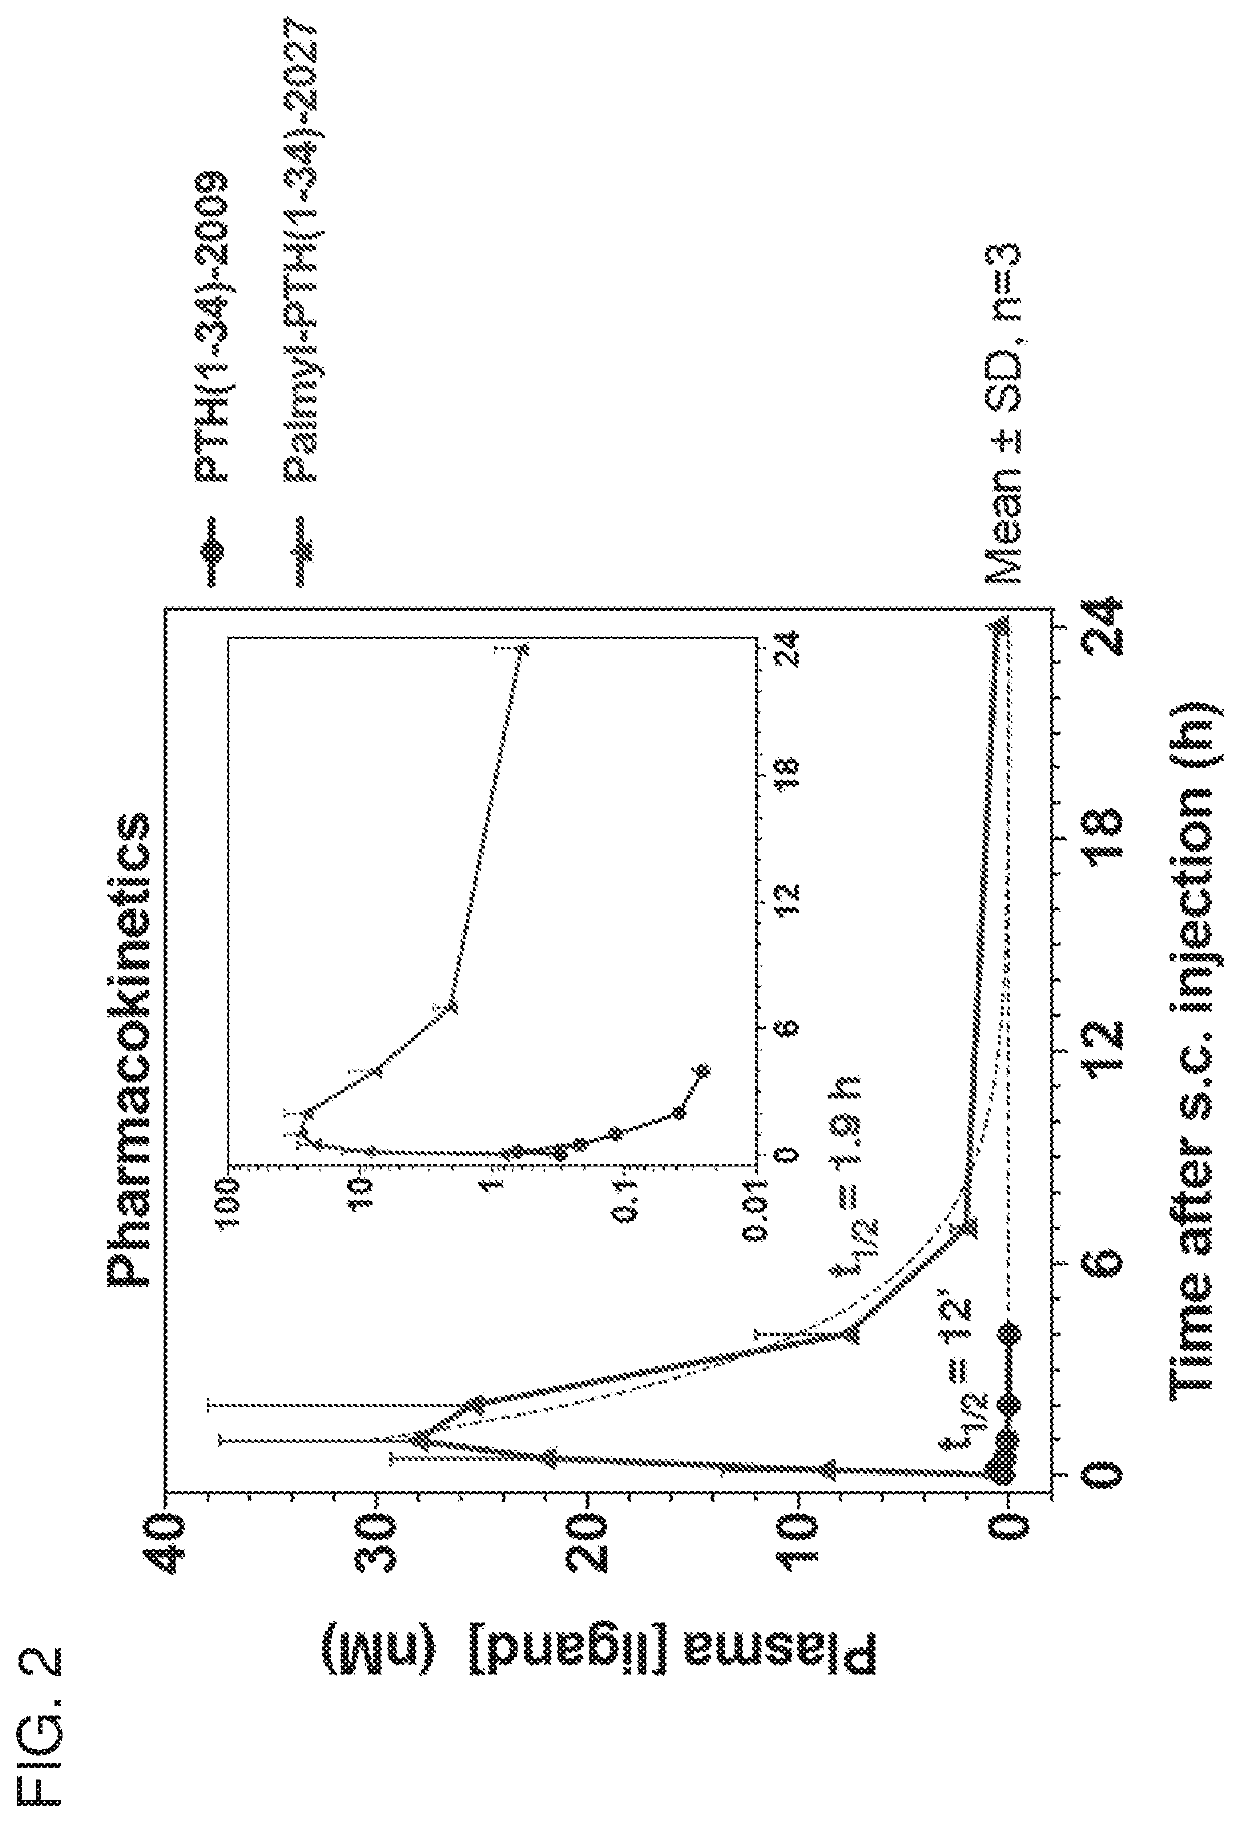 Parathyroid hormone polypeptide conjugates and methods of their use